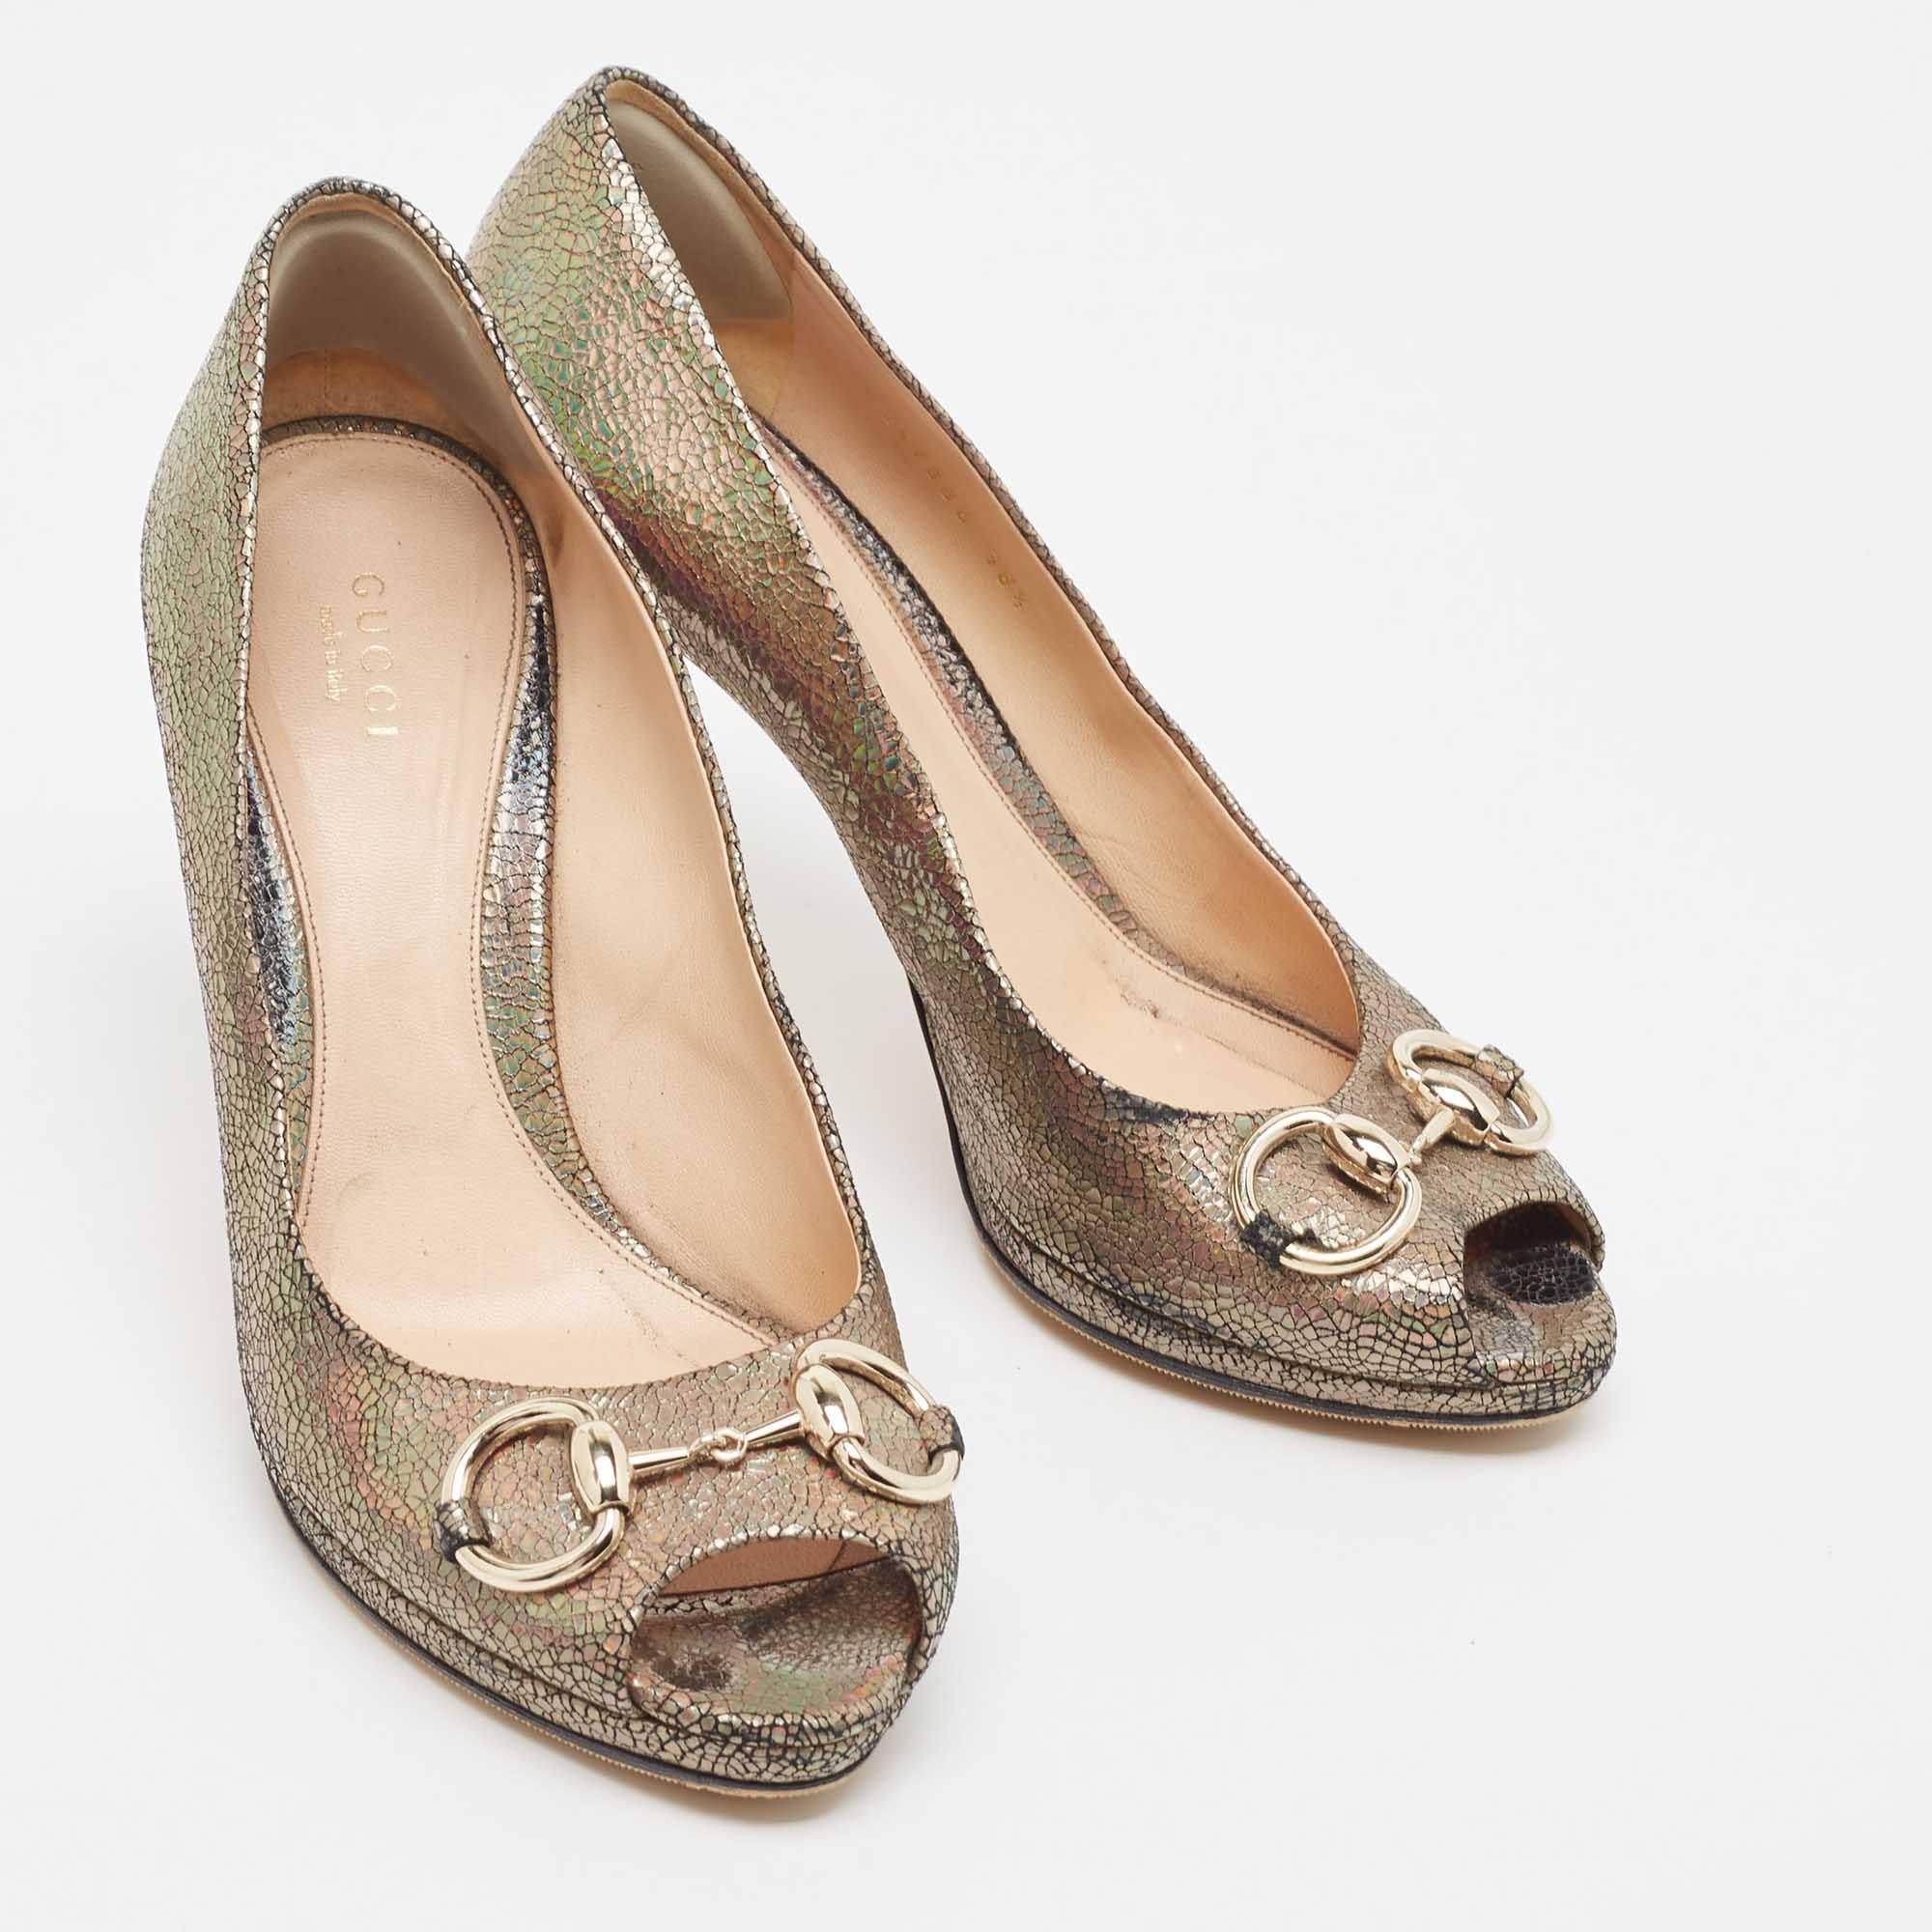 Gucci Metallic Laminated Suede New Hollywood Platform Pumps Size 38.5 For Sale 1